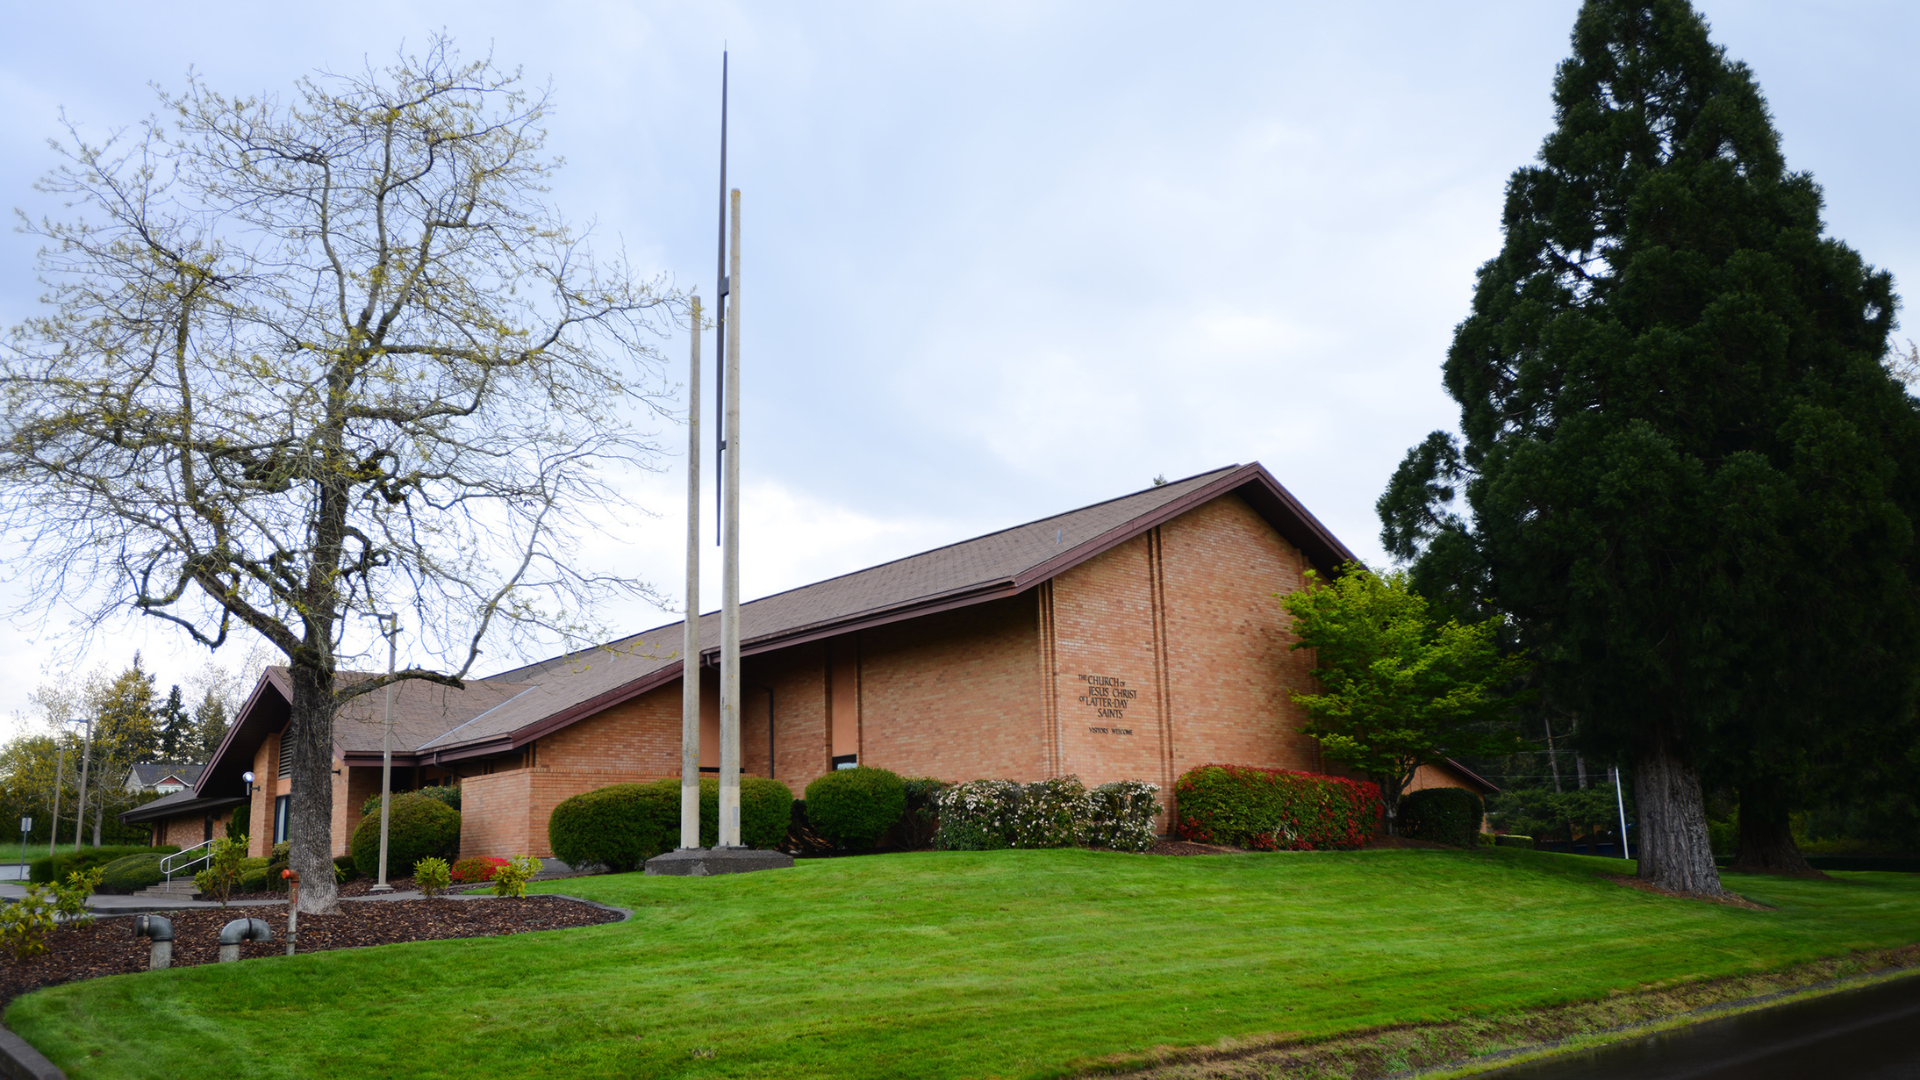 The exterior of the church building located in Turner, Oregon